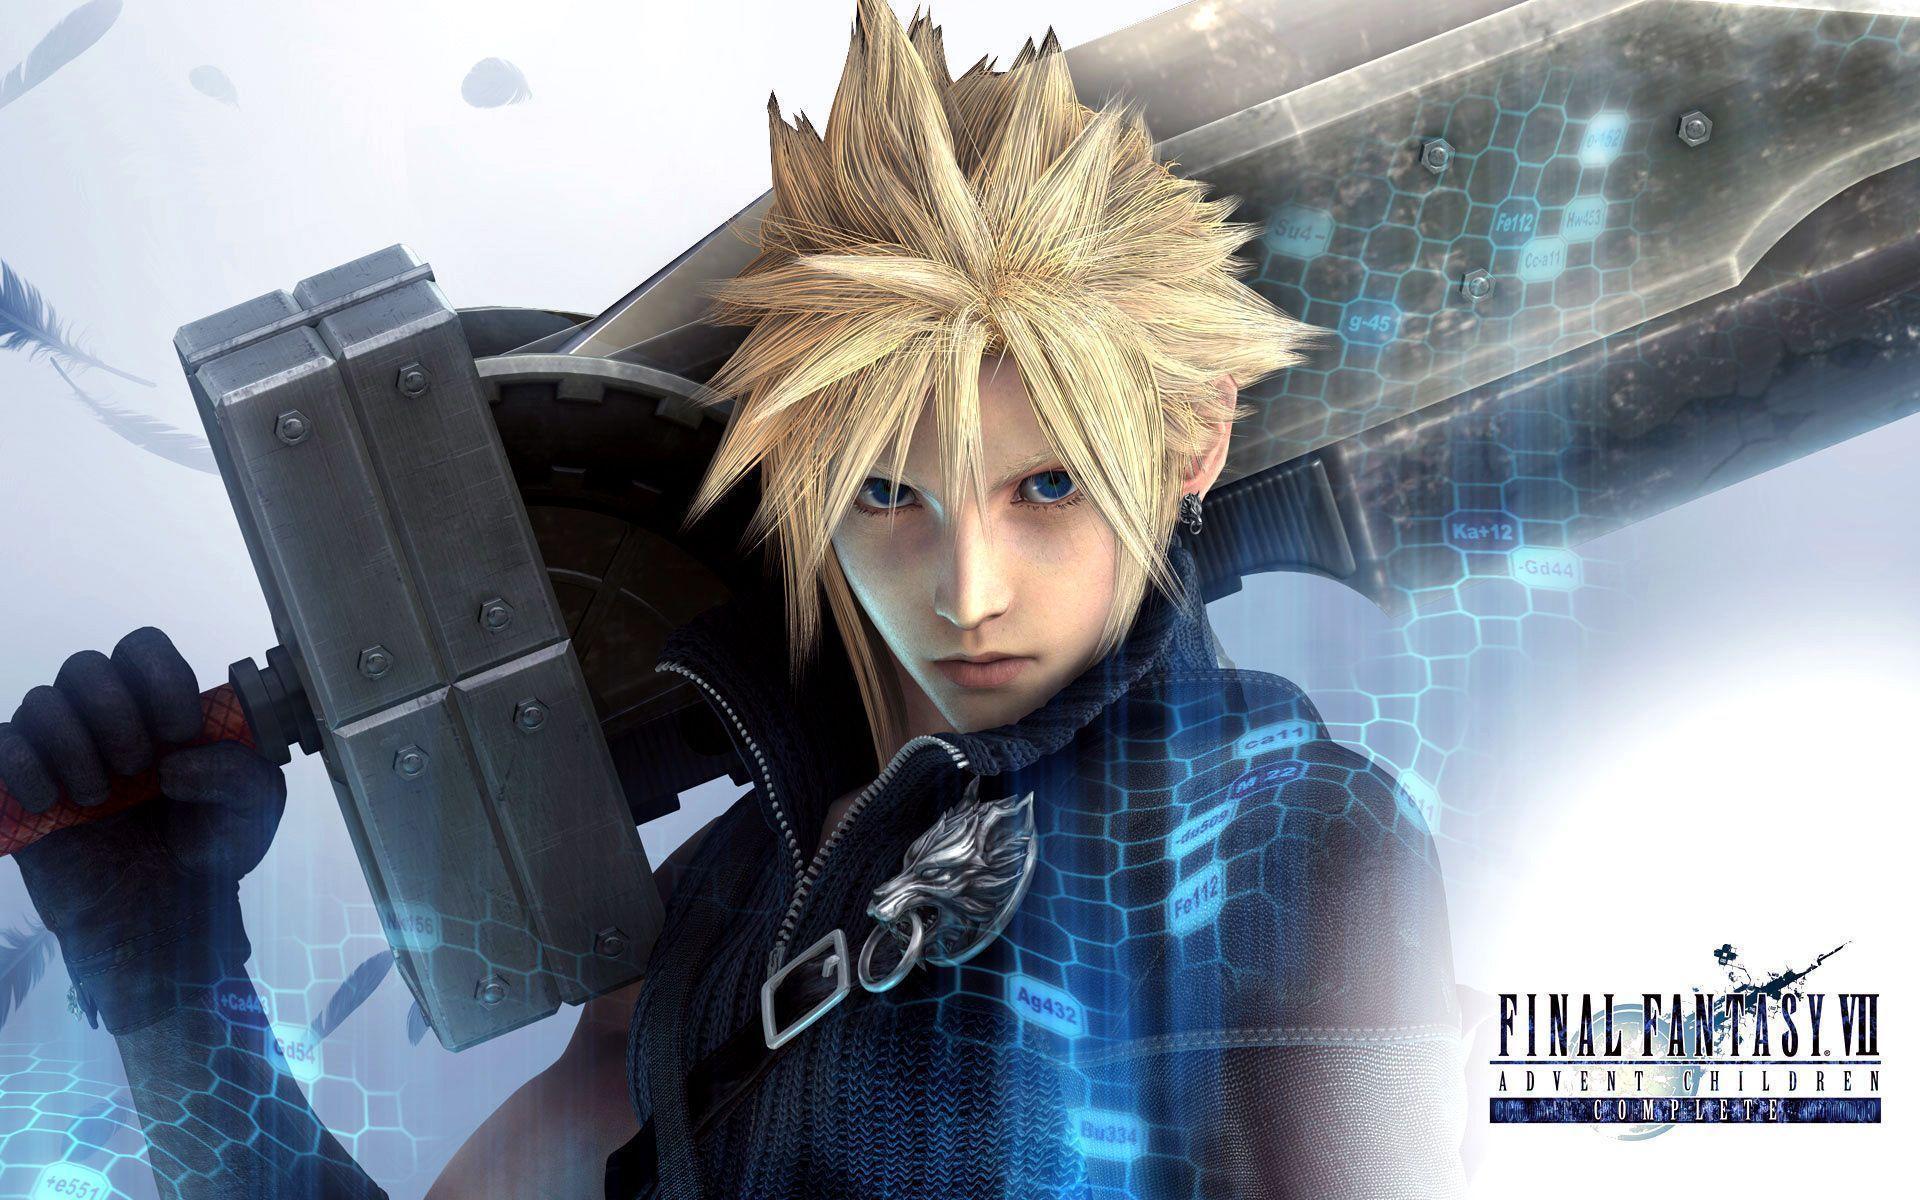 image For > Ff7 Wallpaper HD